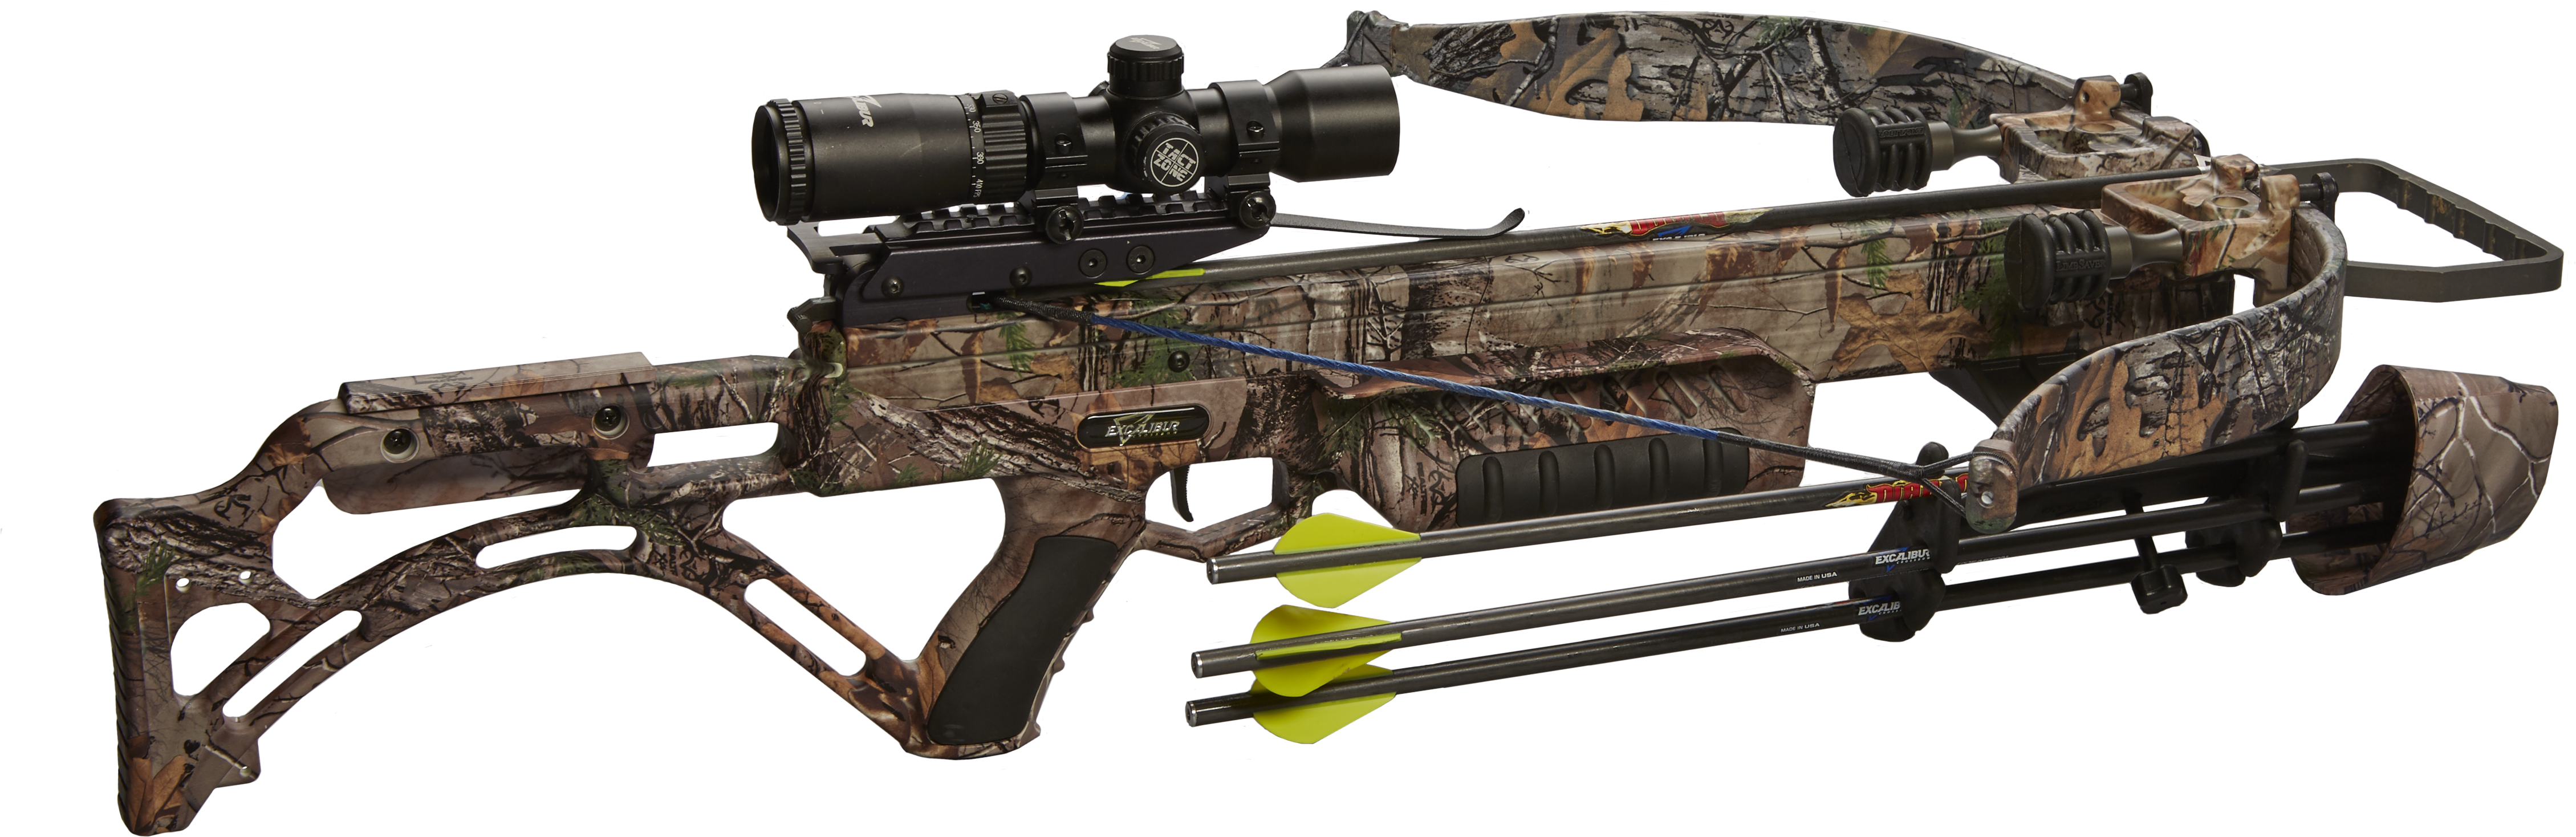 A Crossbow With A Scope And Arrows